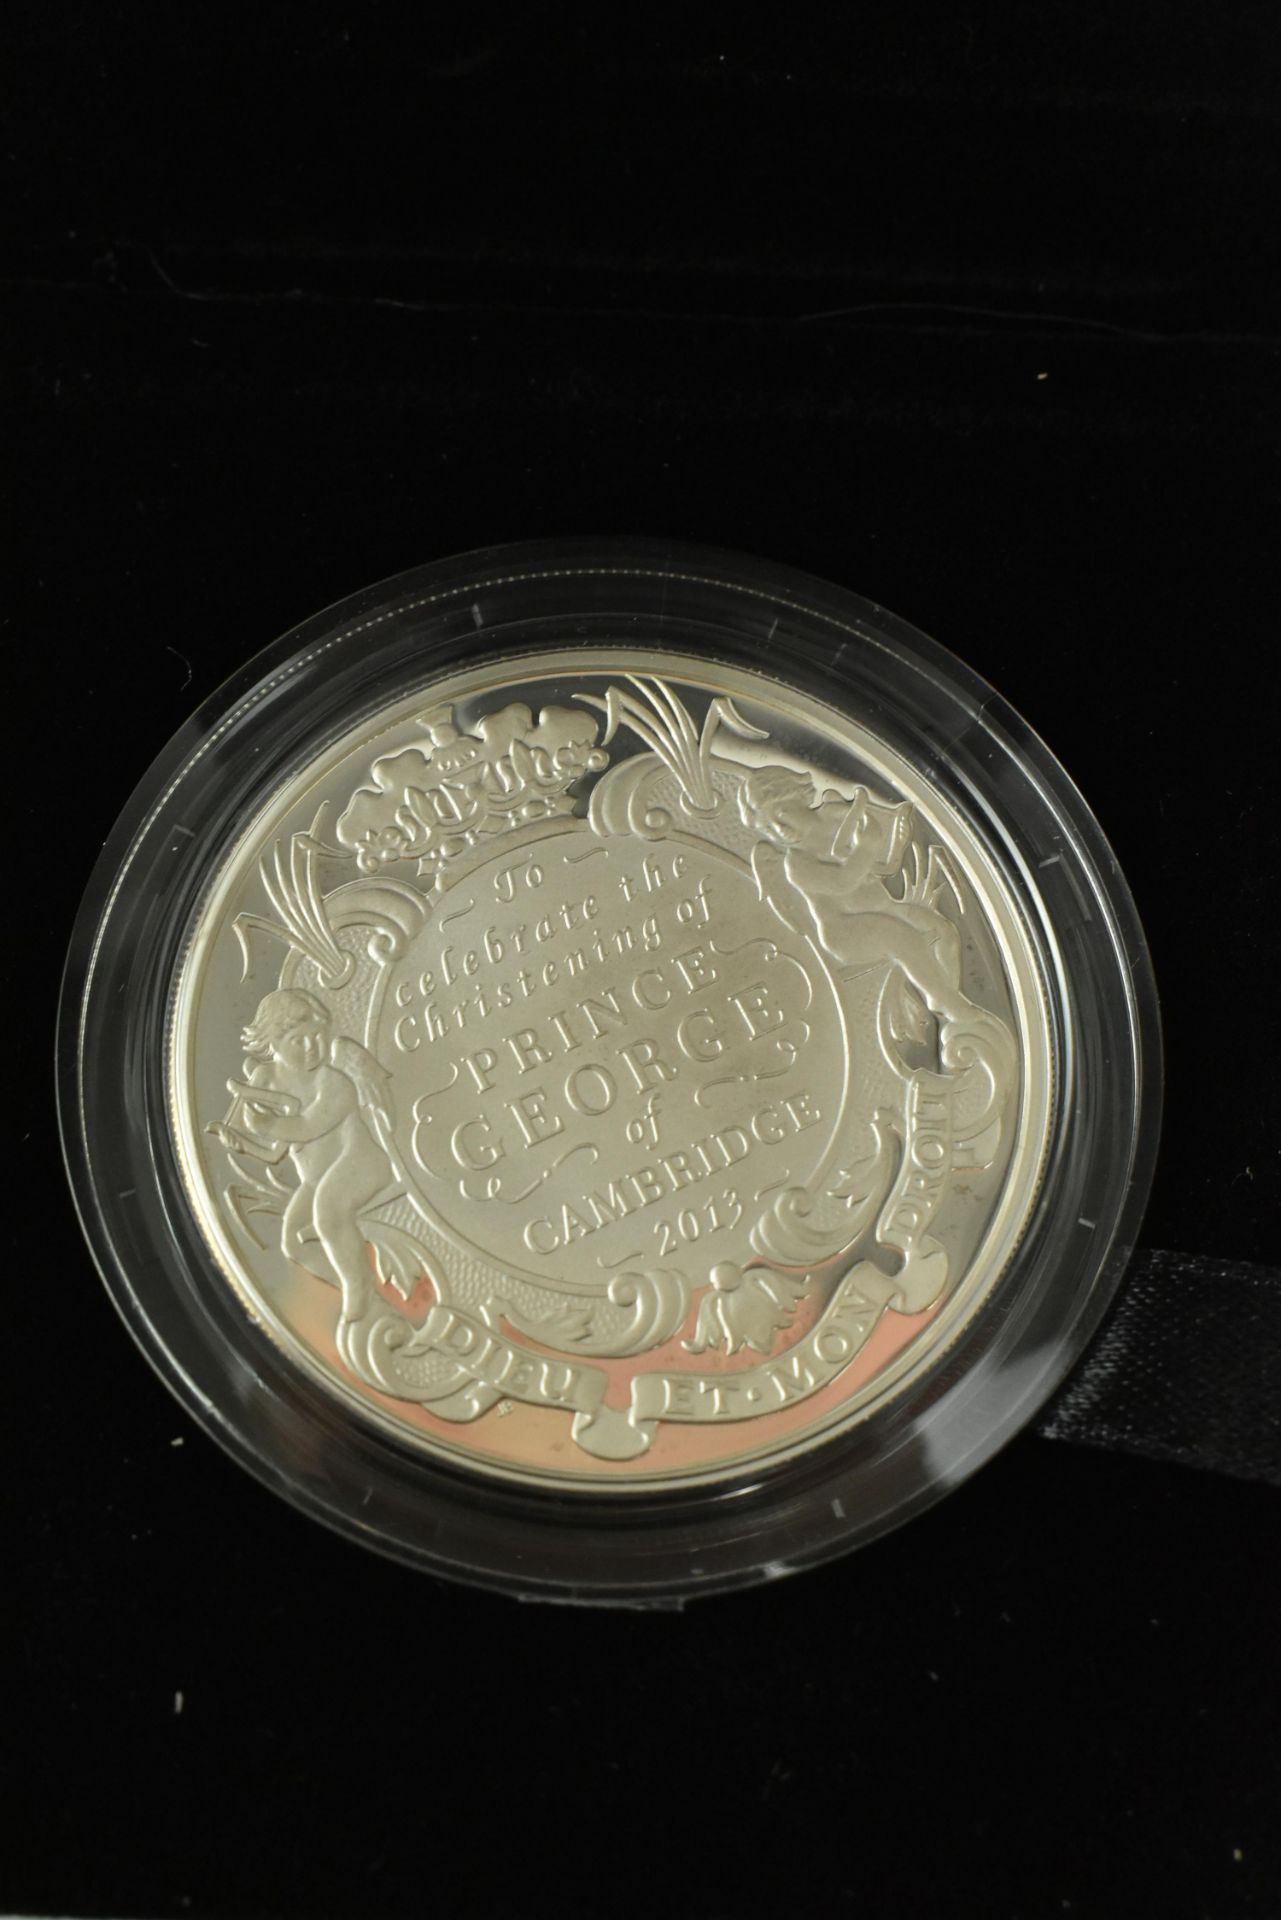 THE ROYAL MINT - THE CHRISTENING OF HRH PRINCE GEORGE £5 COIN - Image 3 of 5